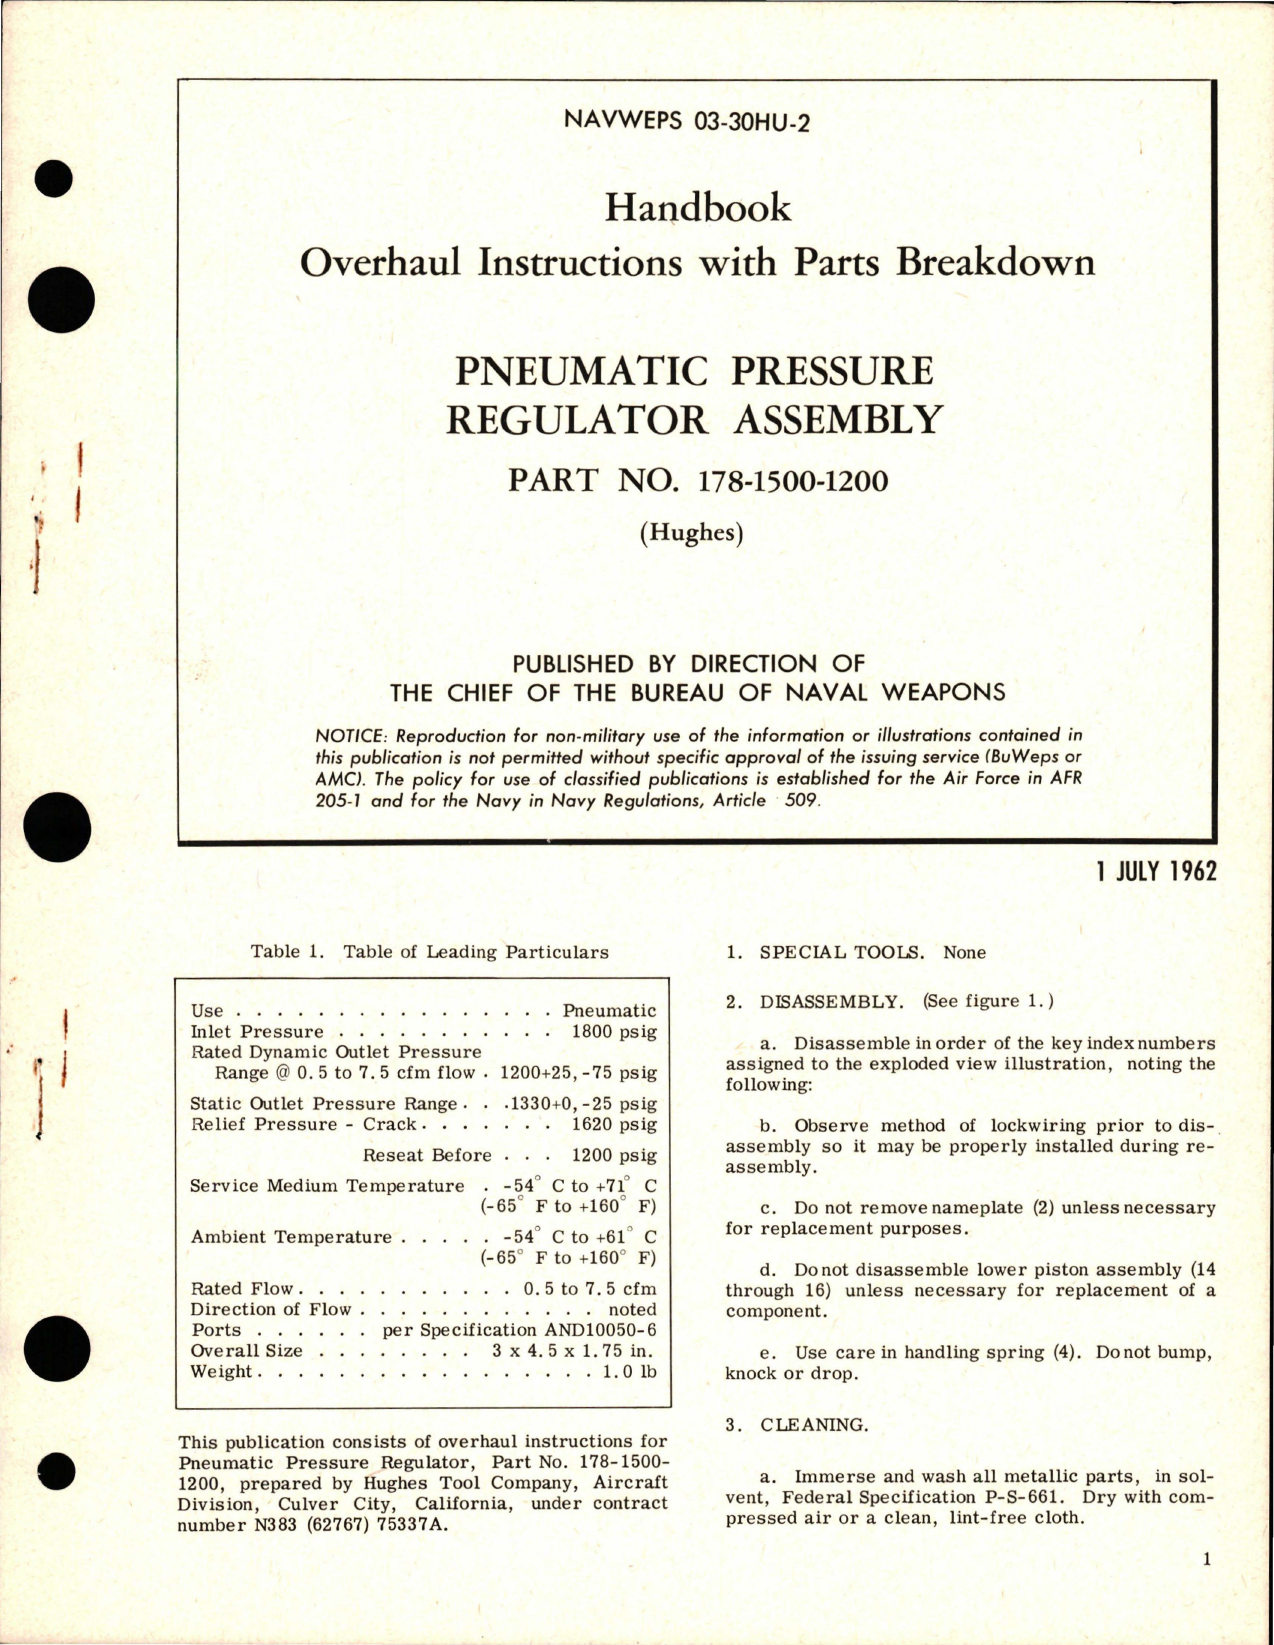 Sample page 1 from AirCorps Library document: Overhaul Instructions with Parts Breakdown for Pneumatic Pressure Regulator Assembly - Part 178-1500-1200